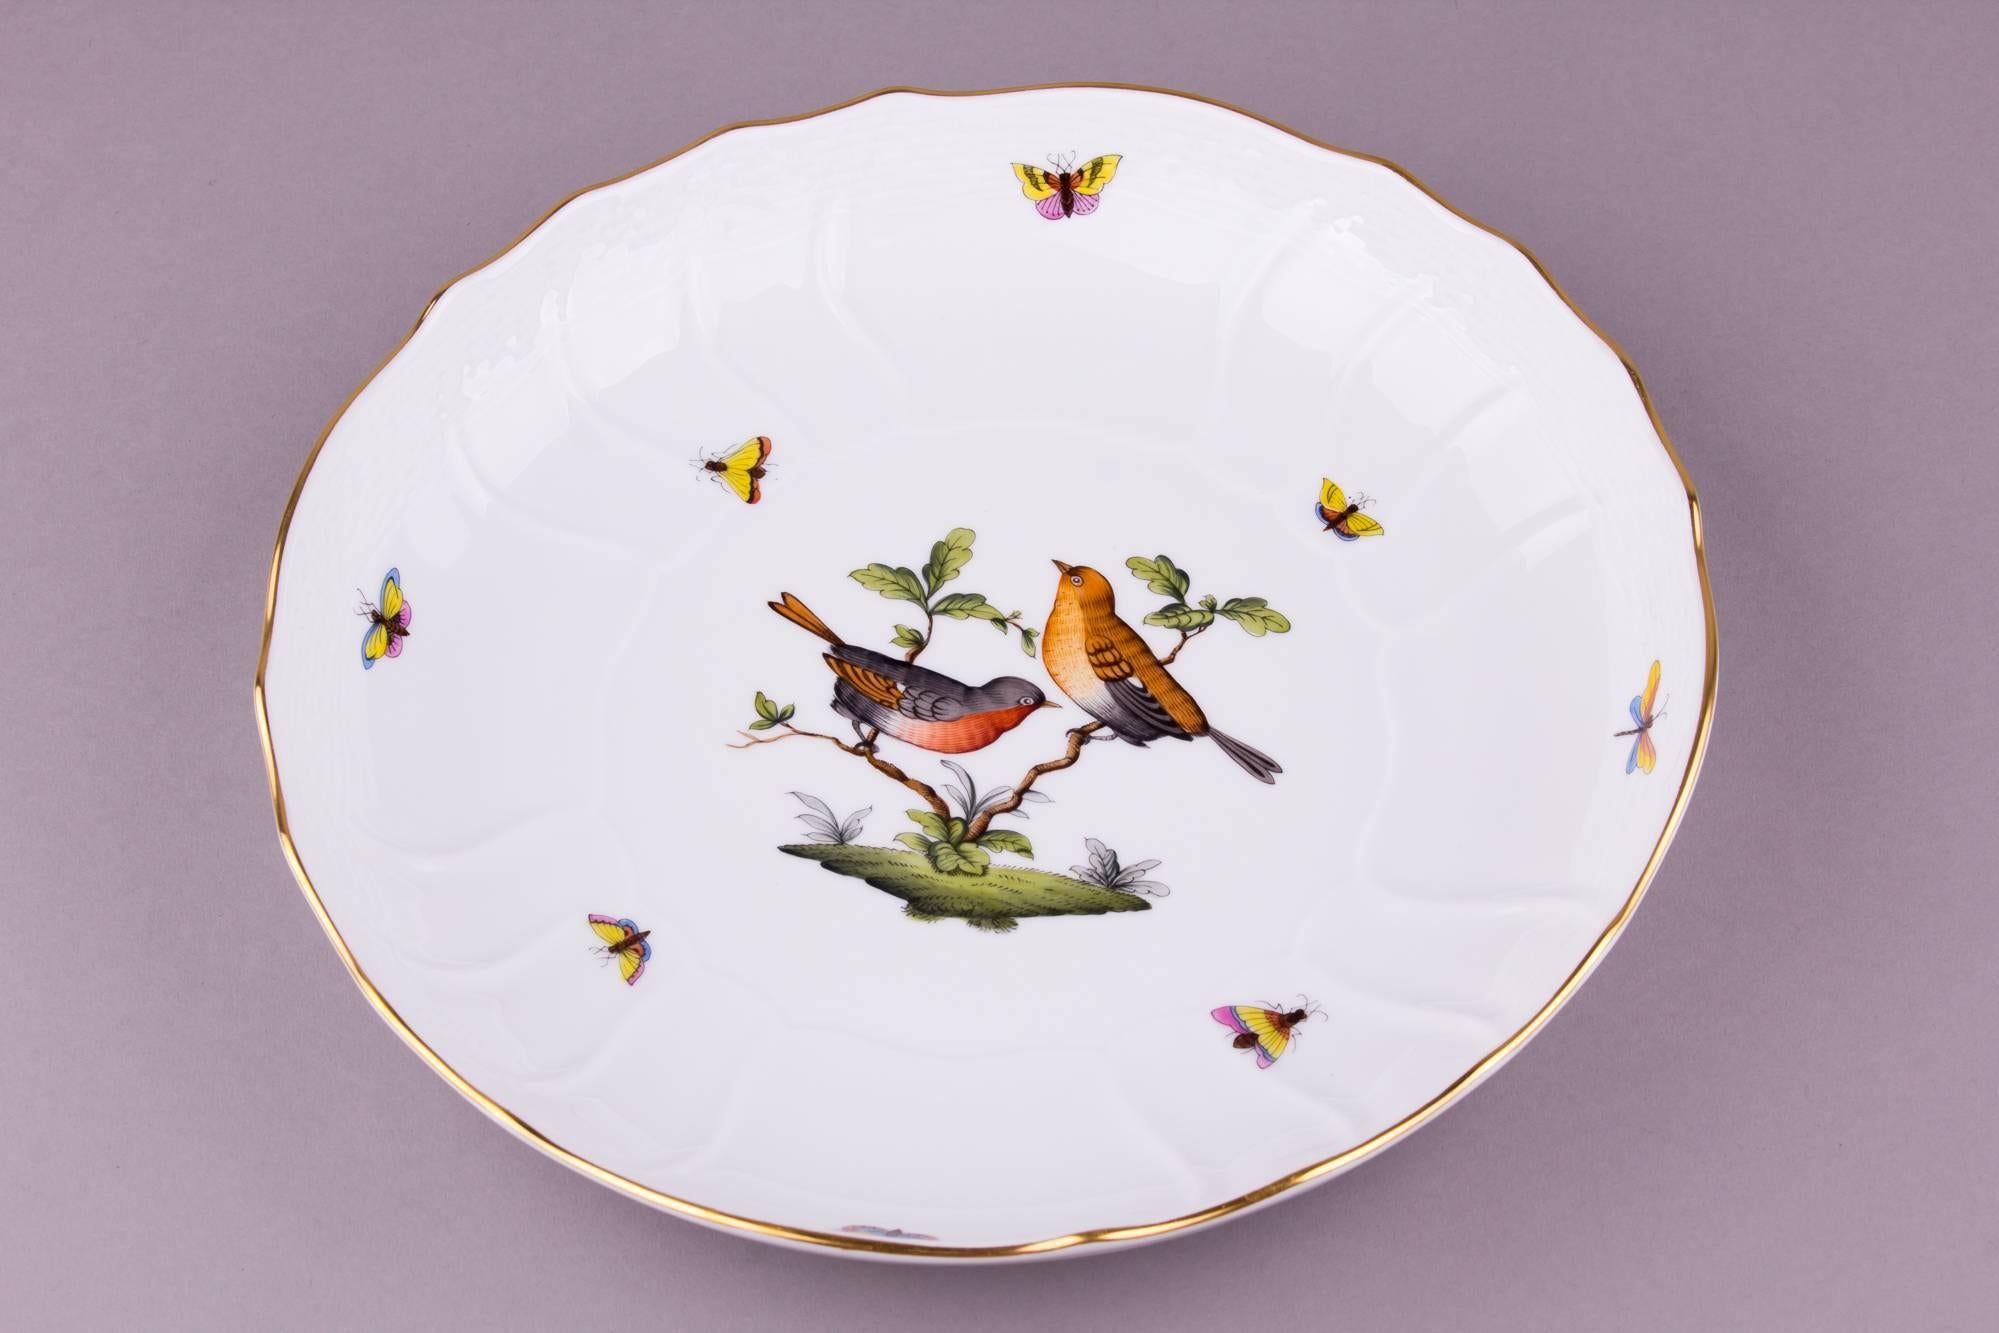 We ship this item worldwide for 70 USD with insurance. Shipping usually takes 3-7 business days. Express shipping with FedEx (2 days) available for 110 USD. 

Manufacturer: Herend Porcelain Manufactory (Hungary).
Quality: Hand-painted, 1st